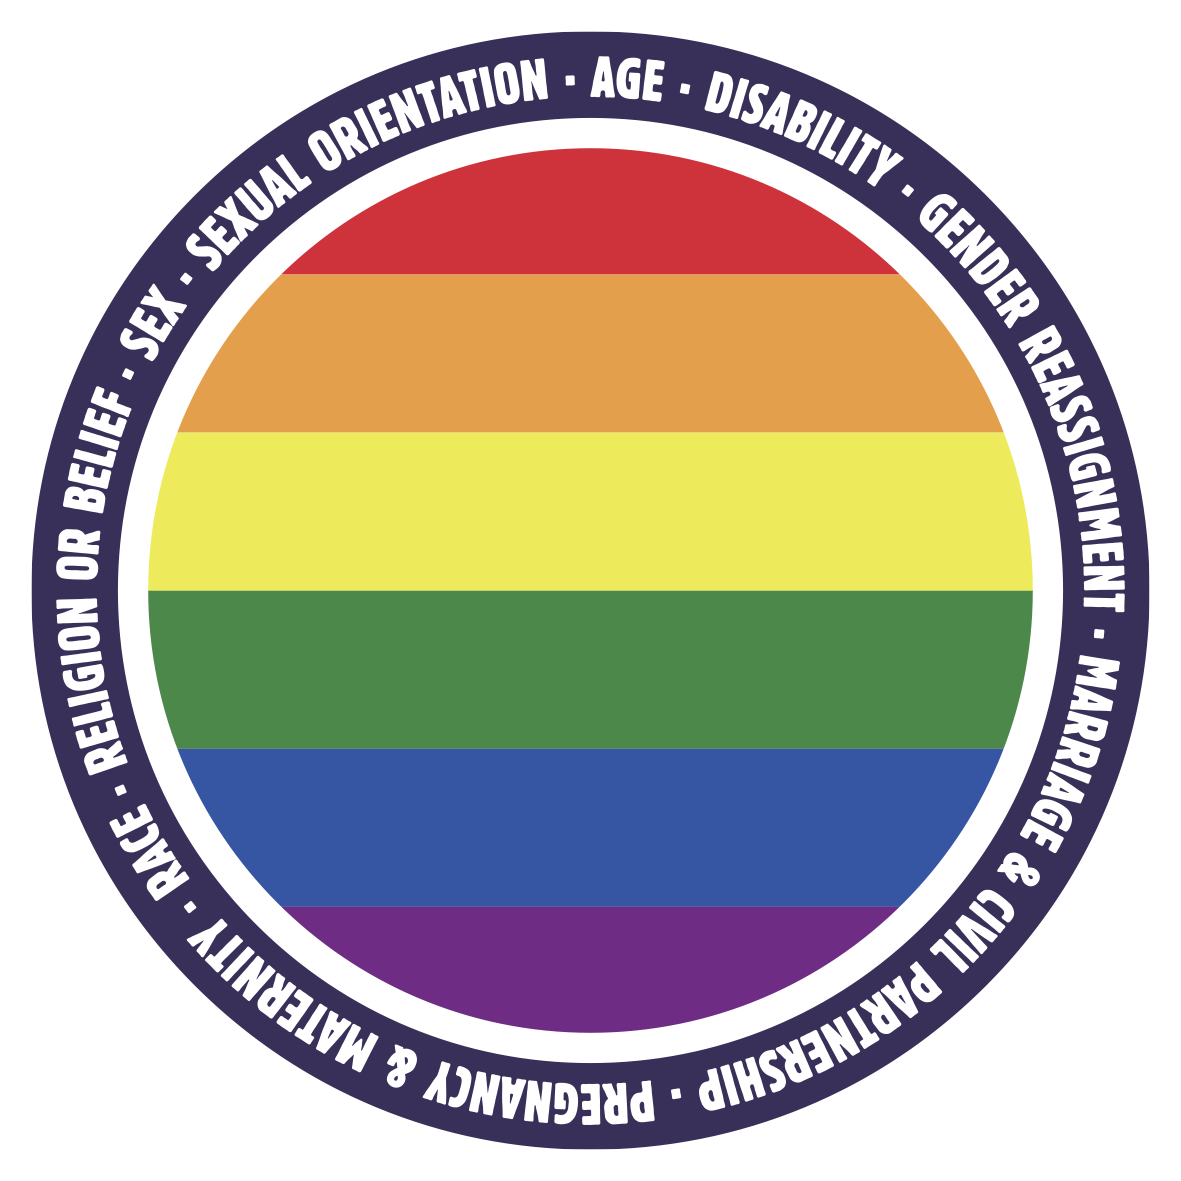 An image of the Rainbow Staff Equality Forum logo.